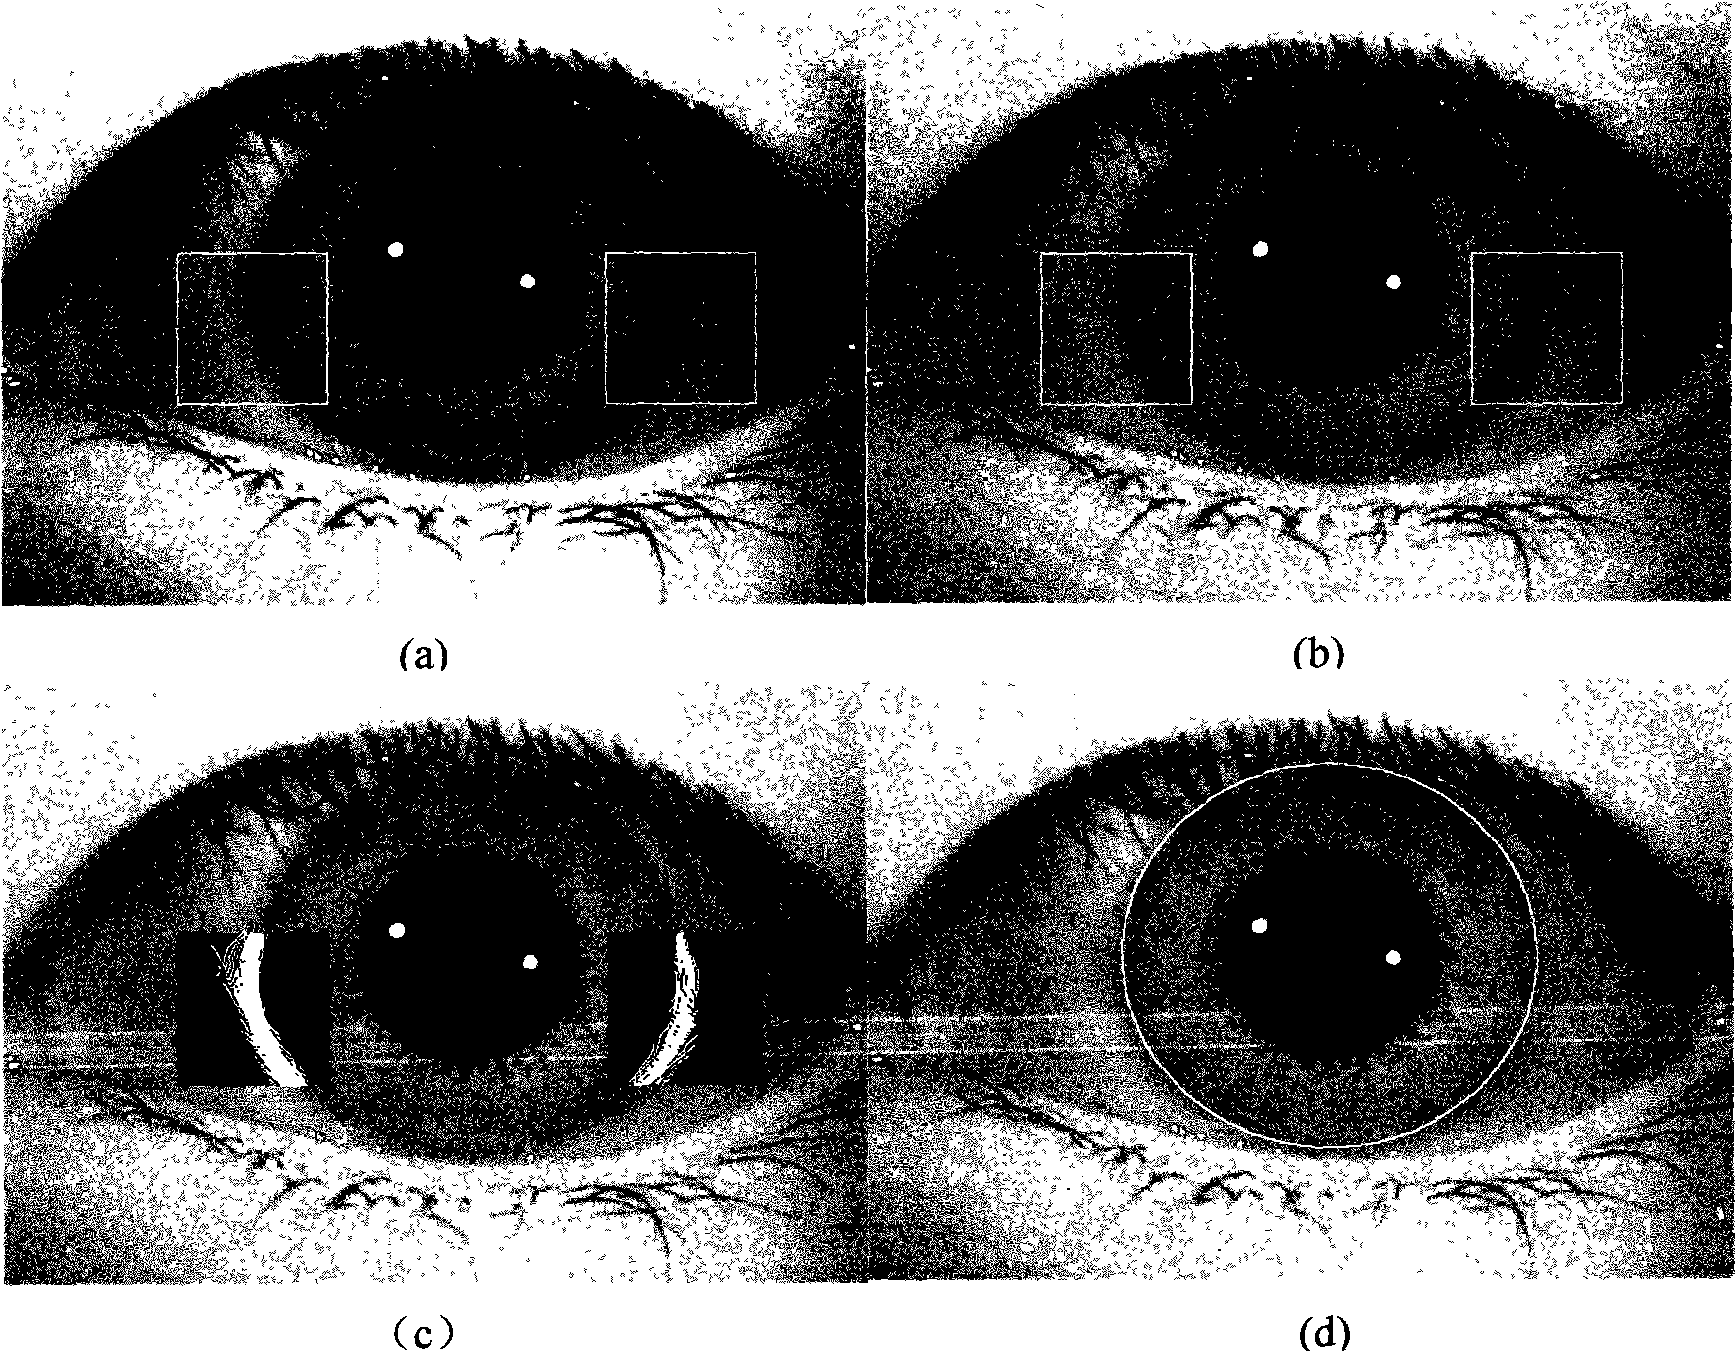 Iris positioning method based on Maximum between-Cluster Variance and gray scale information